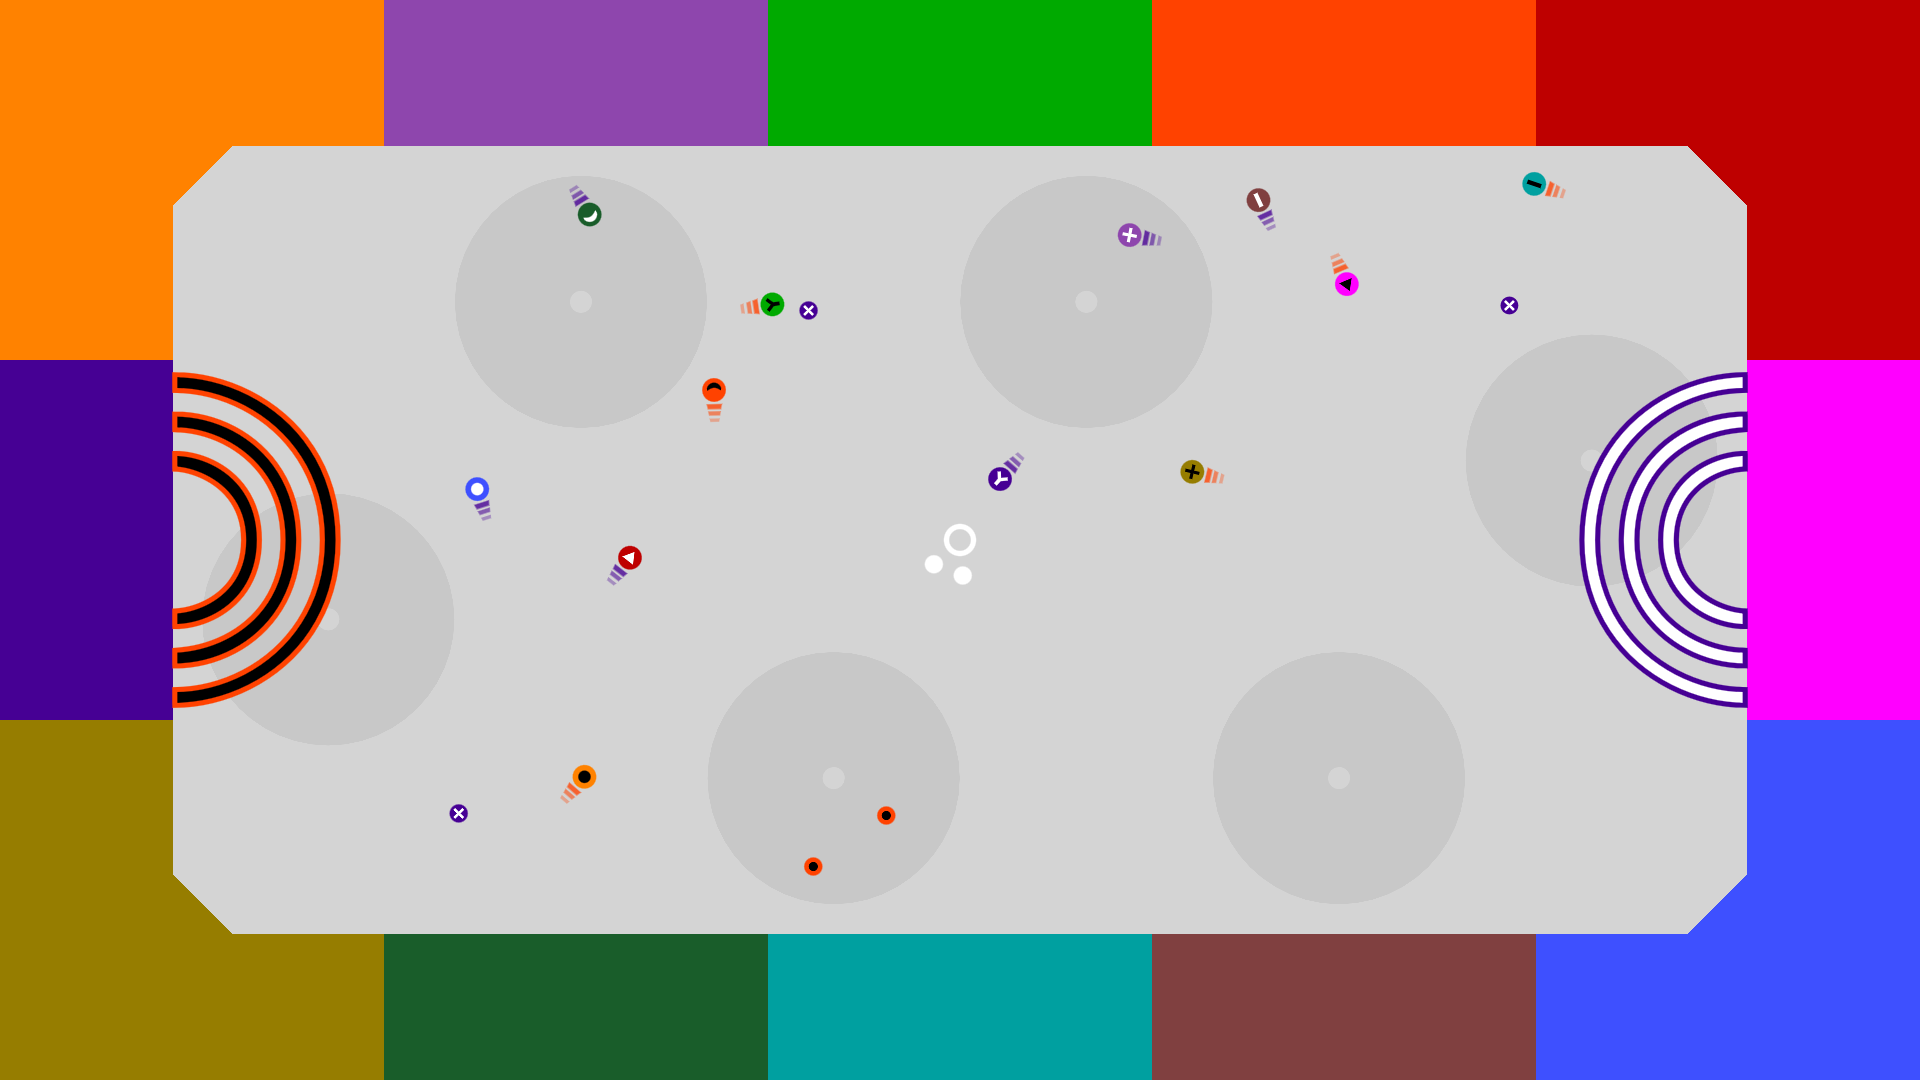 12 orbits - Colorblind Mode - Multiball- 12 players